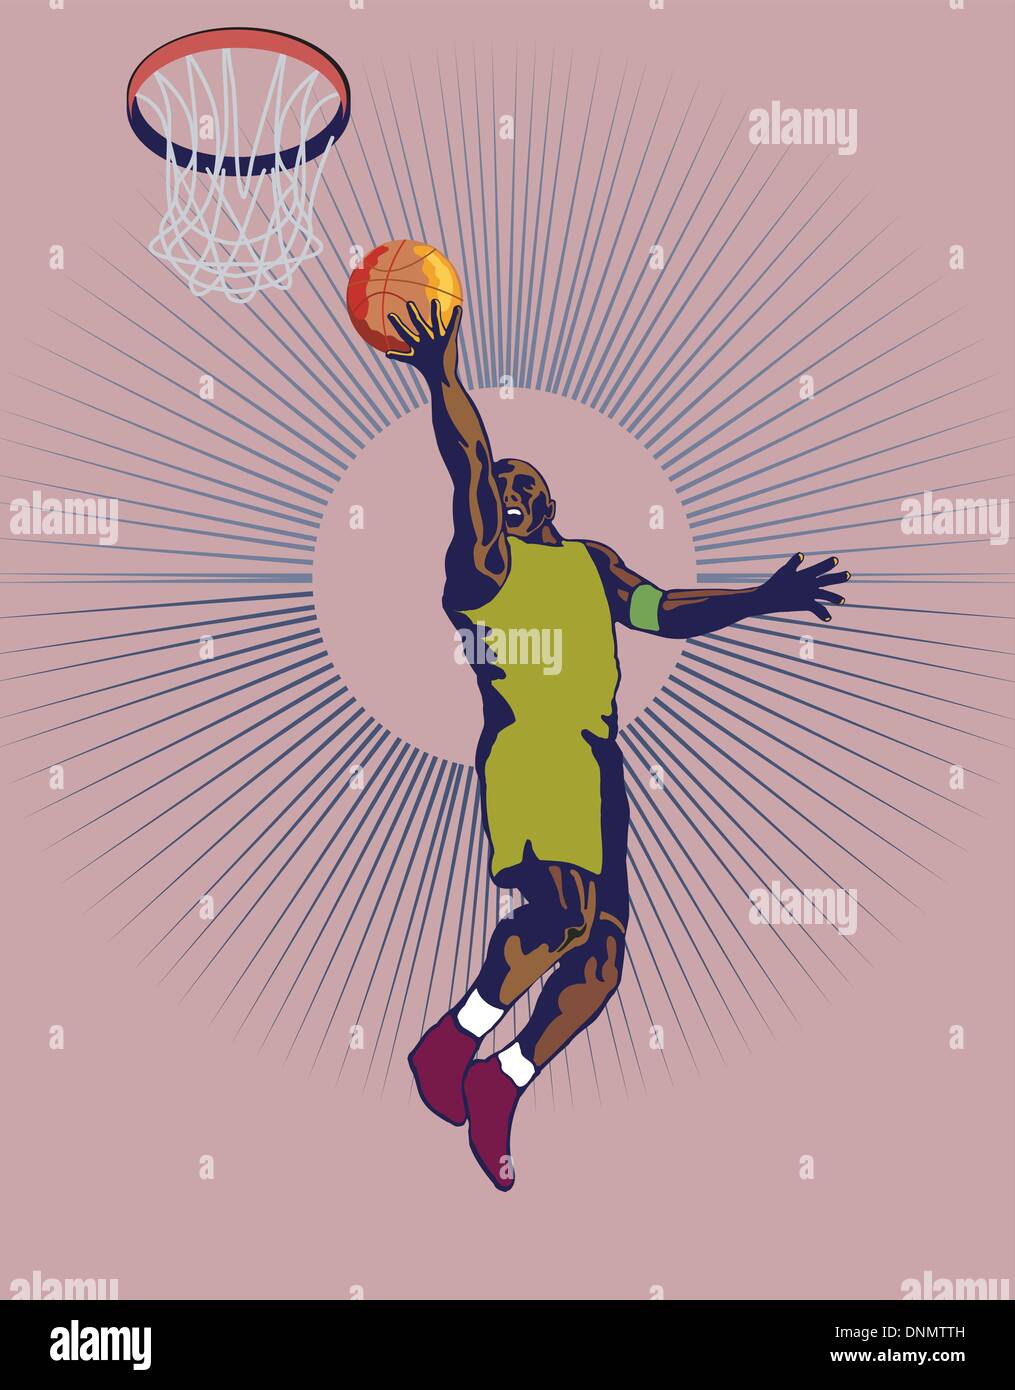 Illustration of a green basketball player dunking ball. Stock Vector